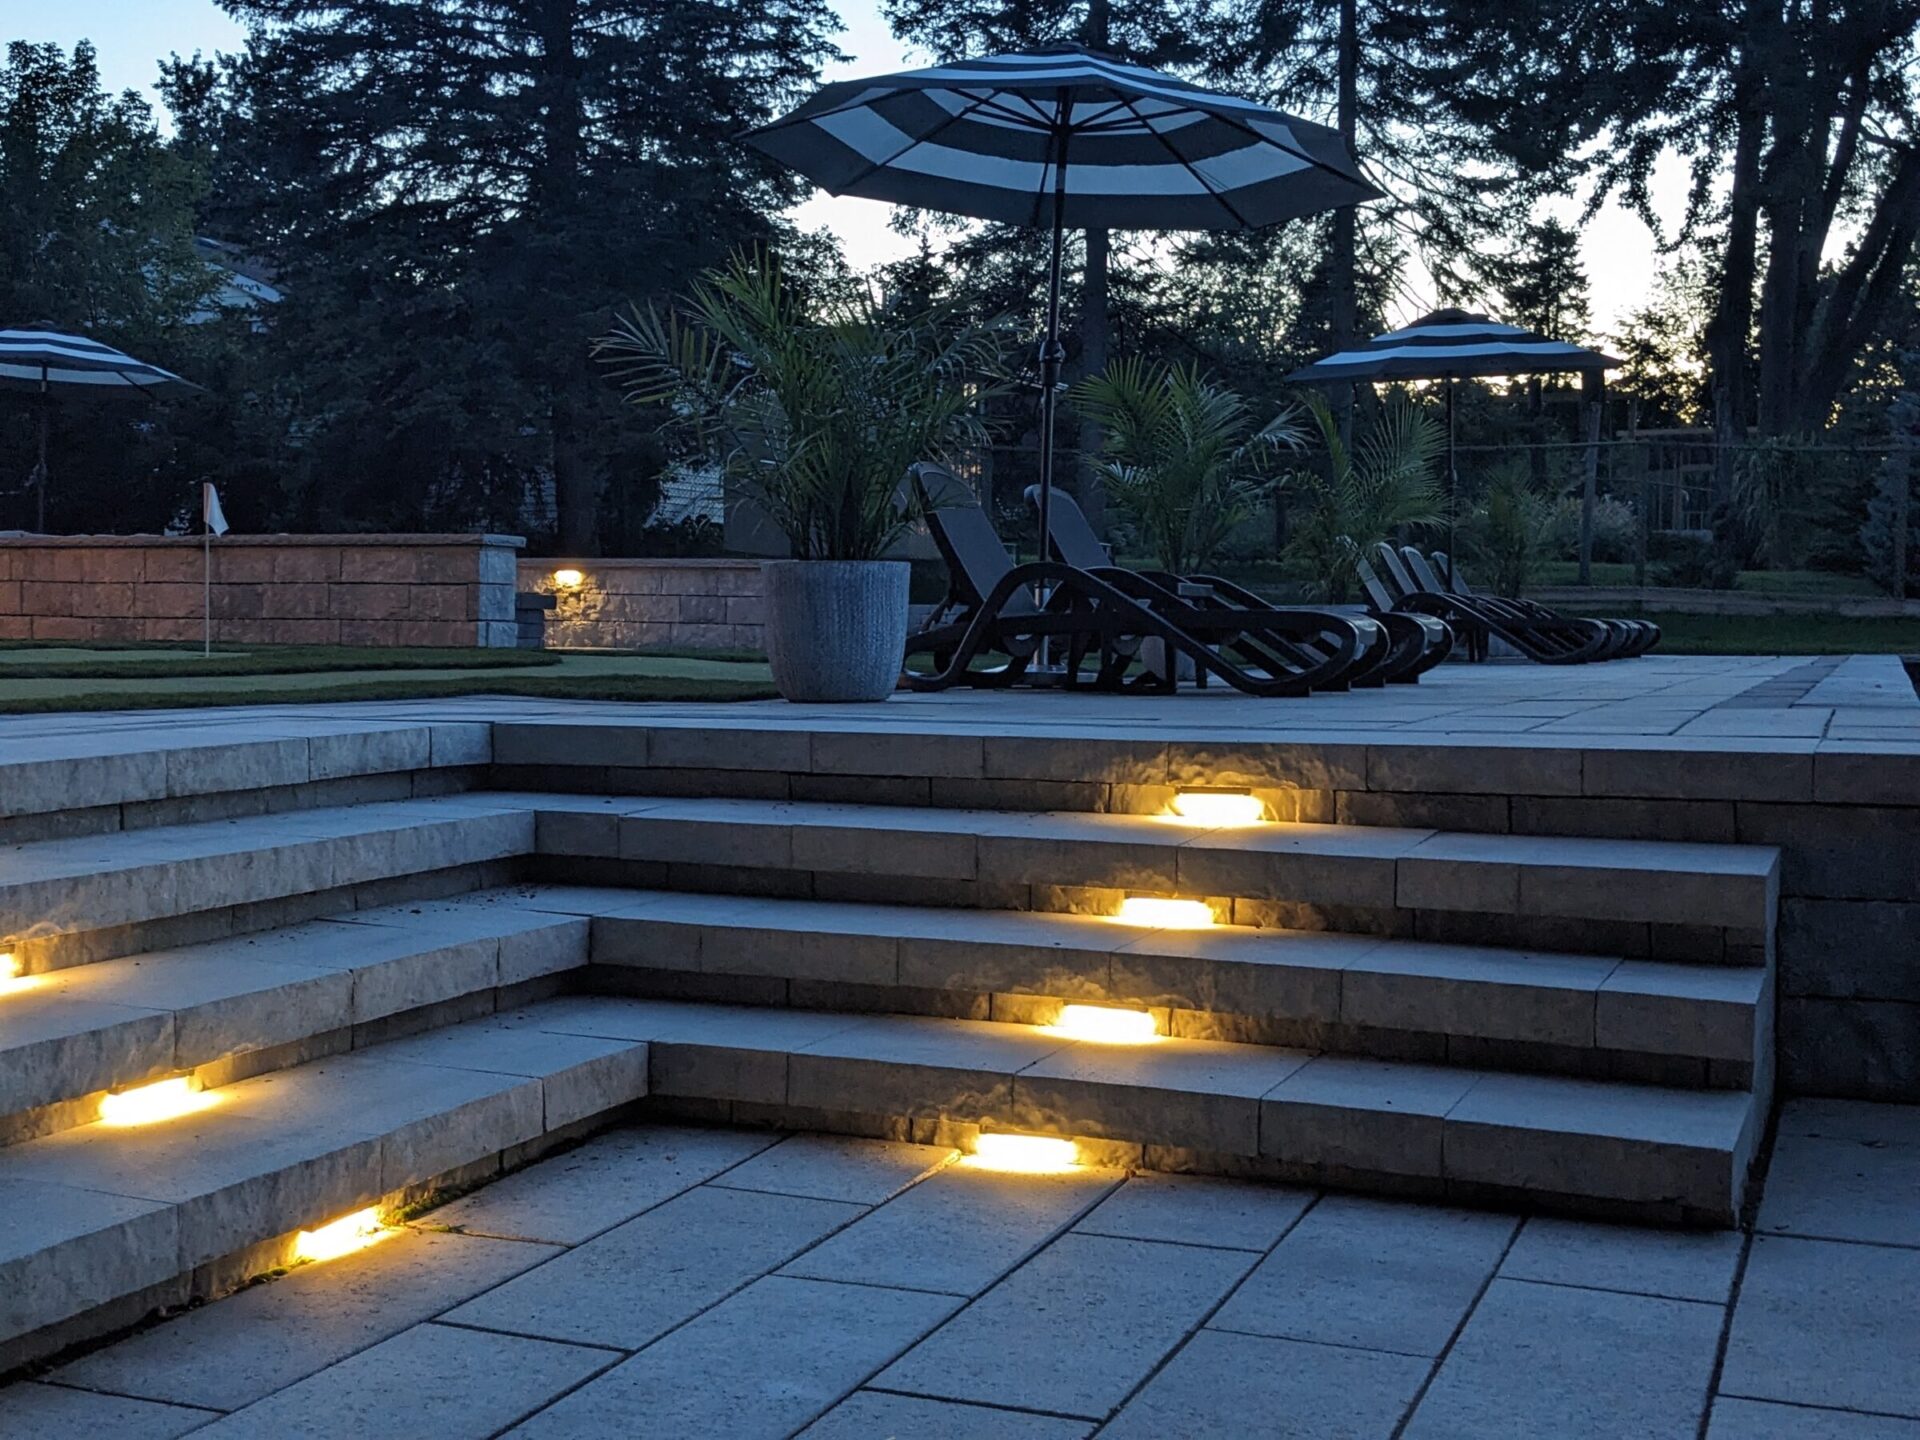 An outdoor patio at dusk with lit step lights, sun loungers, umbrellas, trees, and a well-manicured lawn in a tranquil setting.